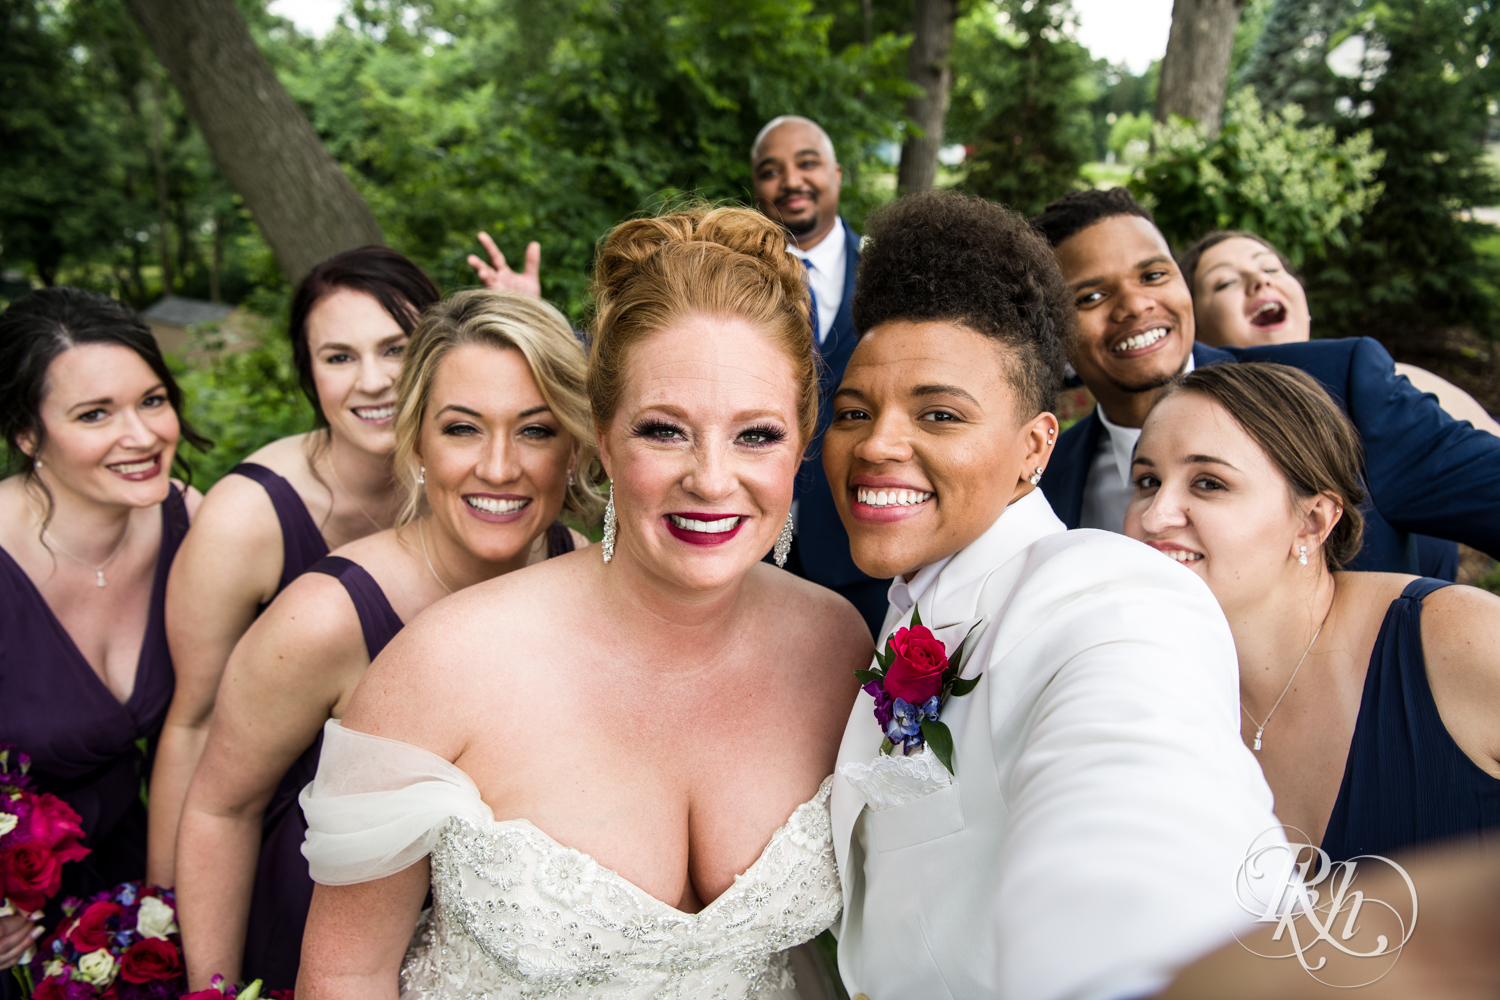 Black lesbian bride and white bride smile with wedding party at Leopold's Mississippi Gardens in Brooklyn Park, Minnesota.